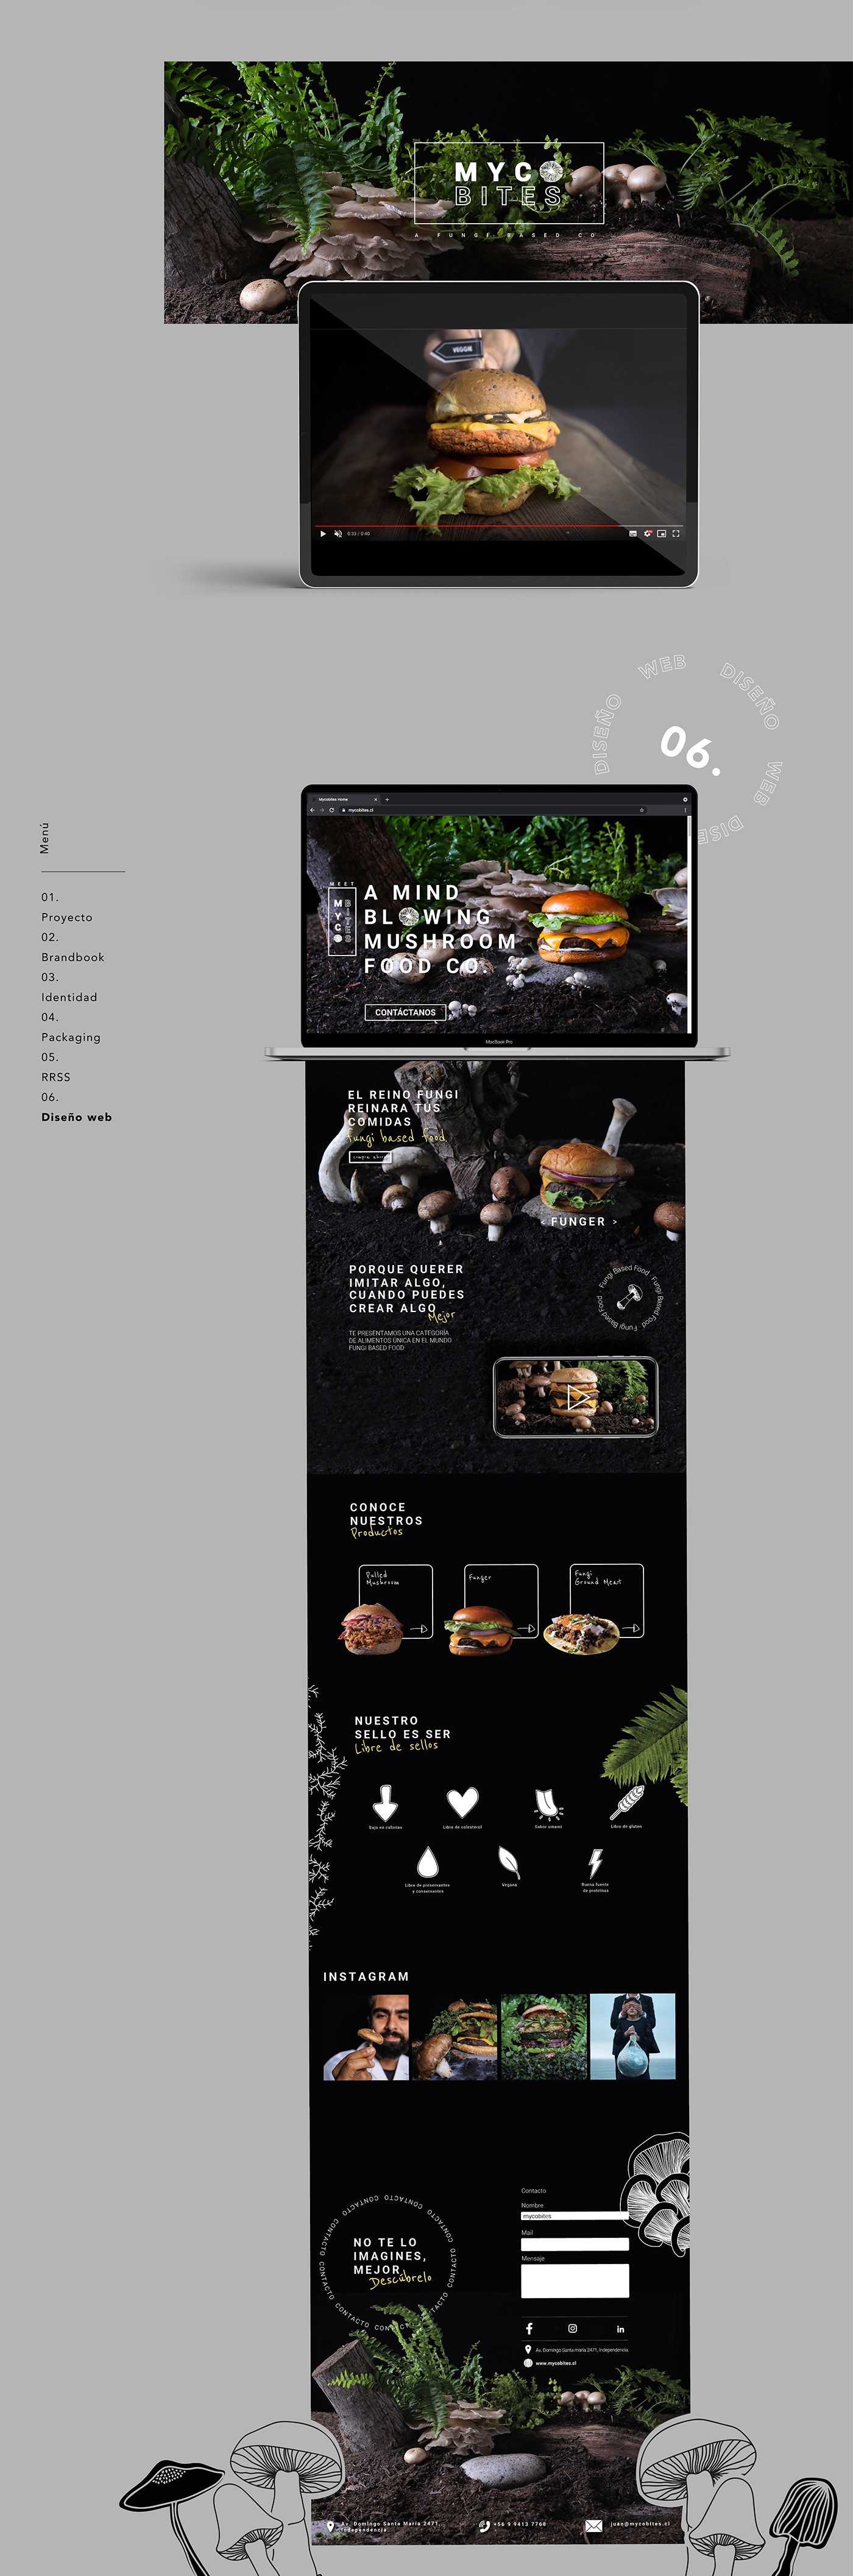 Mushrooms Photography  Food  Plant Based burger Cheese food styling graphic design  Website